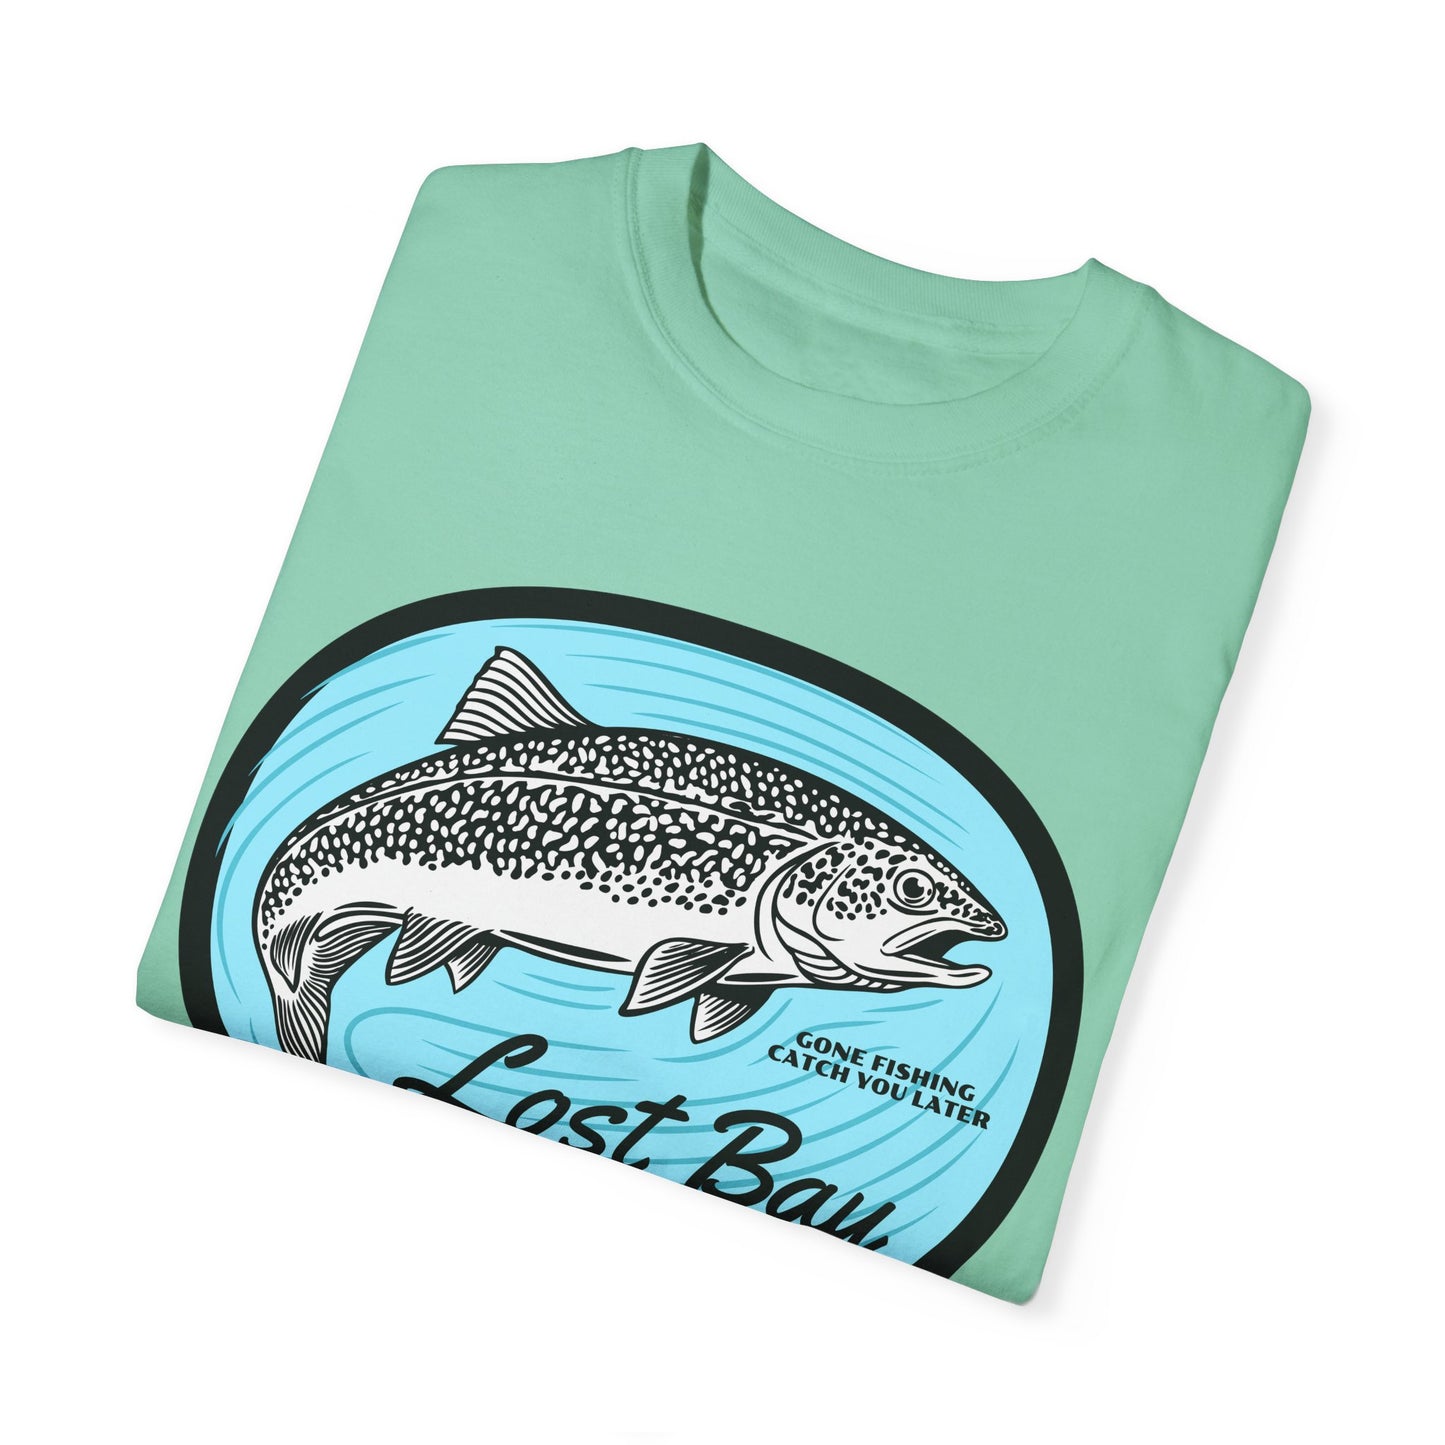 Gone Fishing, Catch You Later - Unisex Garment-Dyed T-shirt